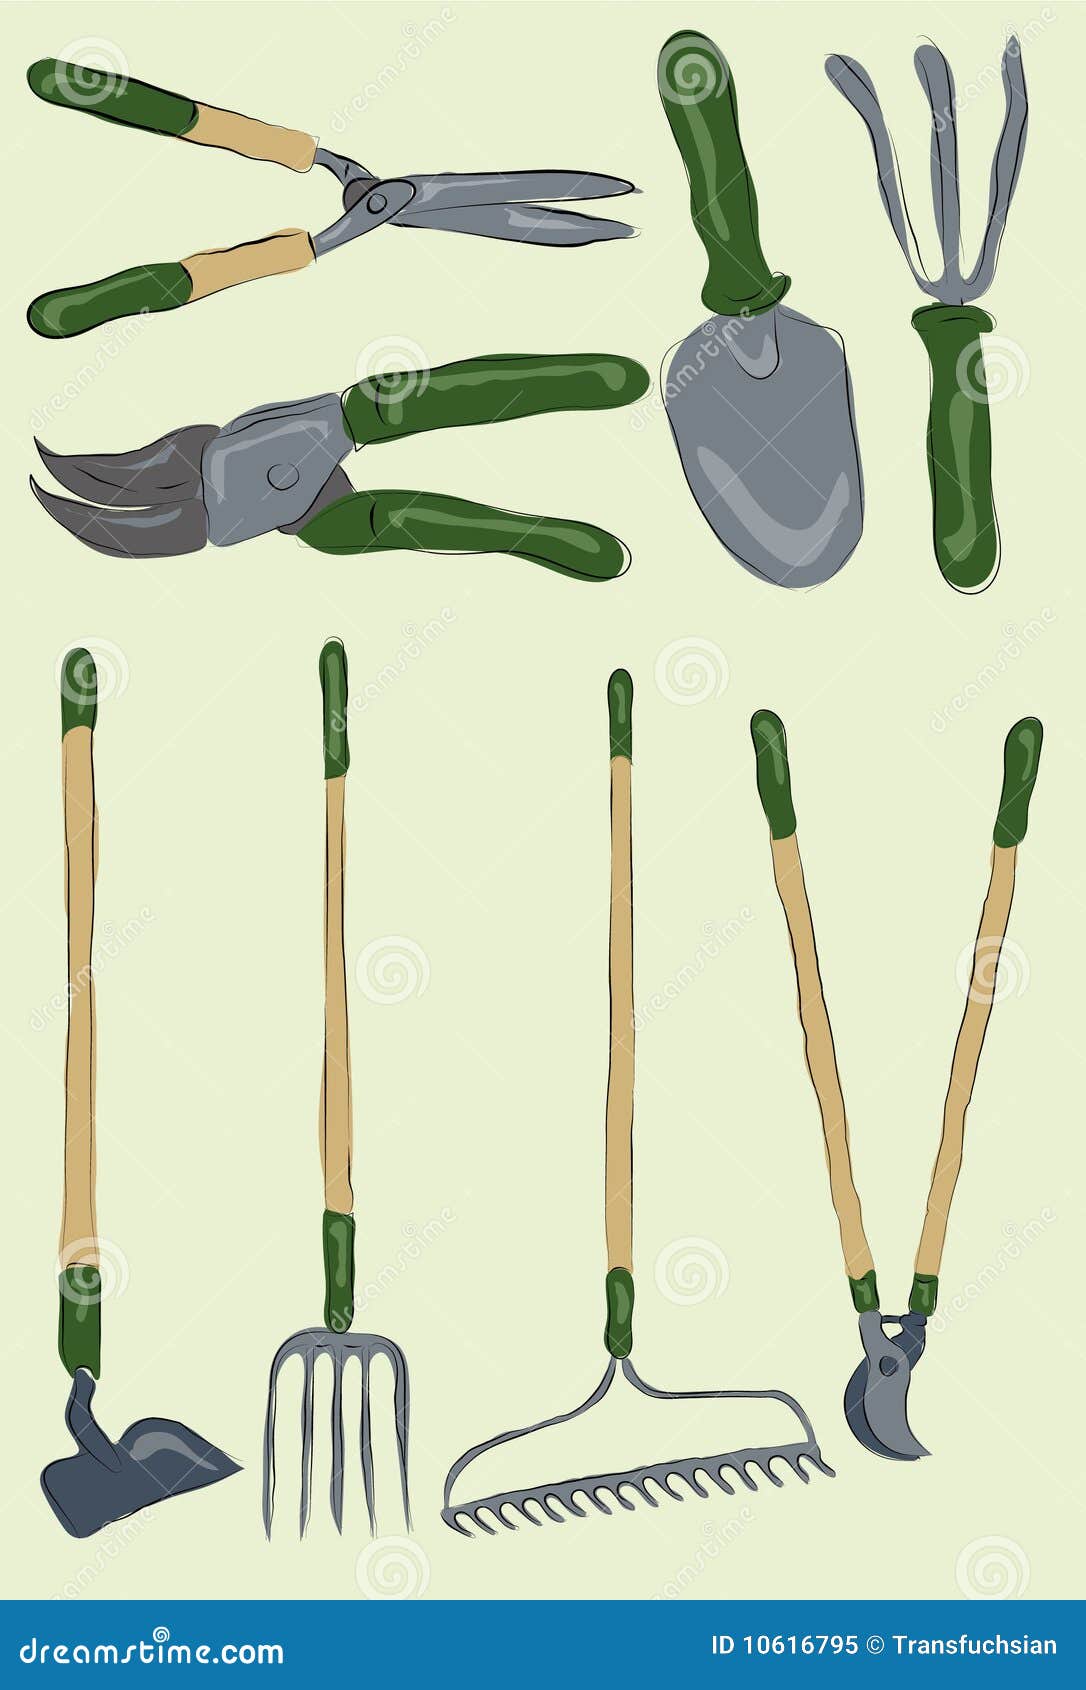 Collection Of Messy Hand Drawn Gardening Tools Stock Vector